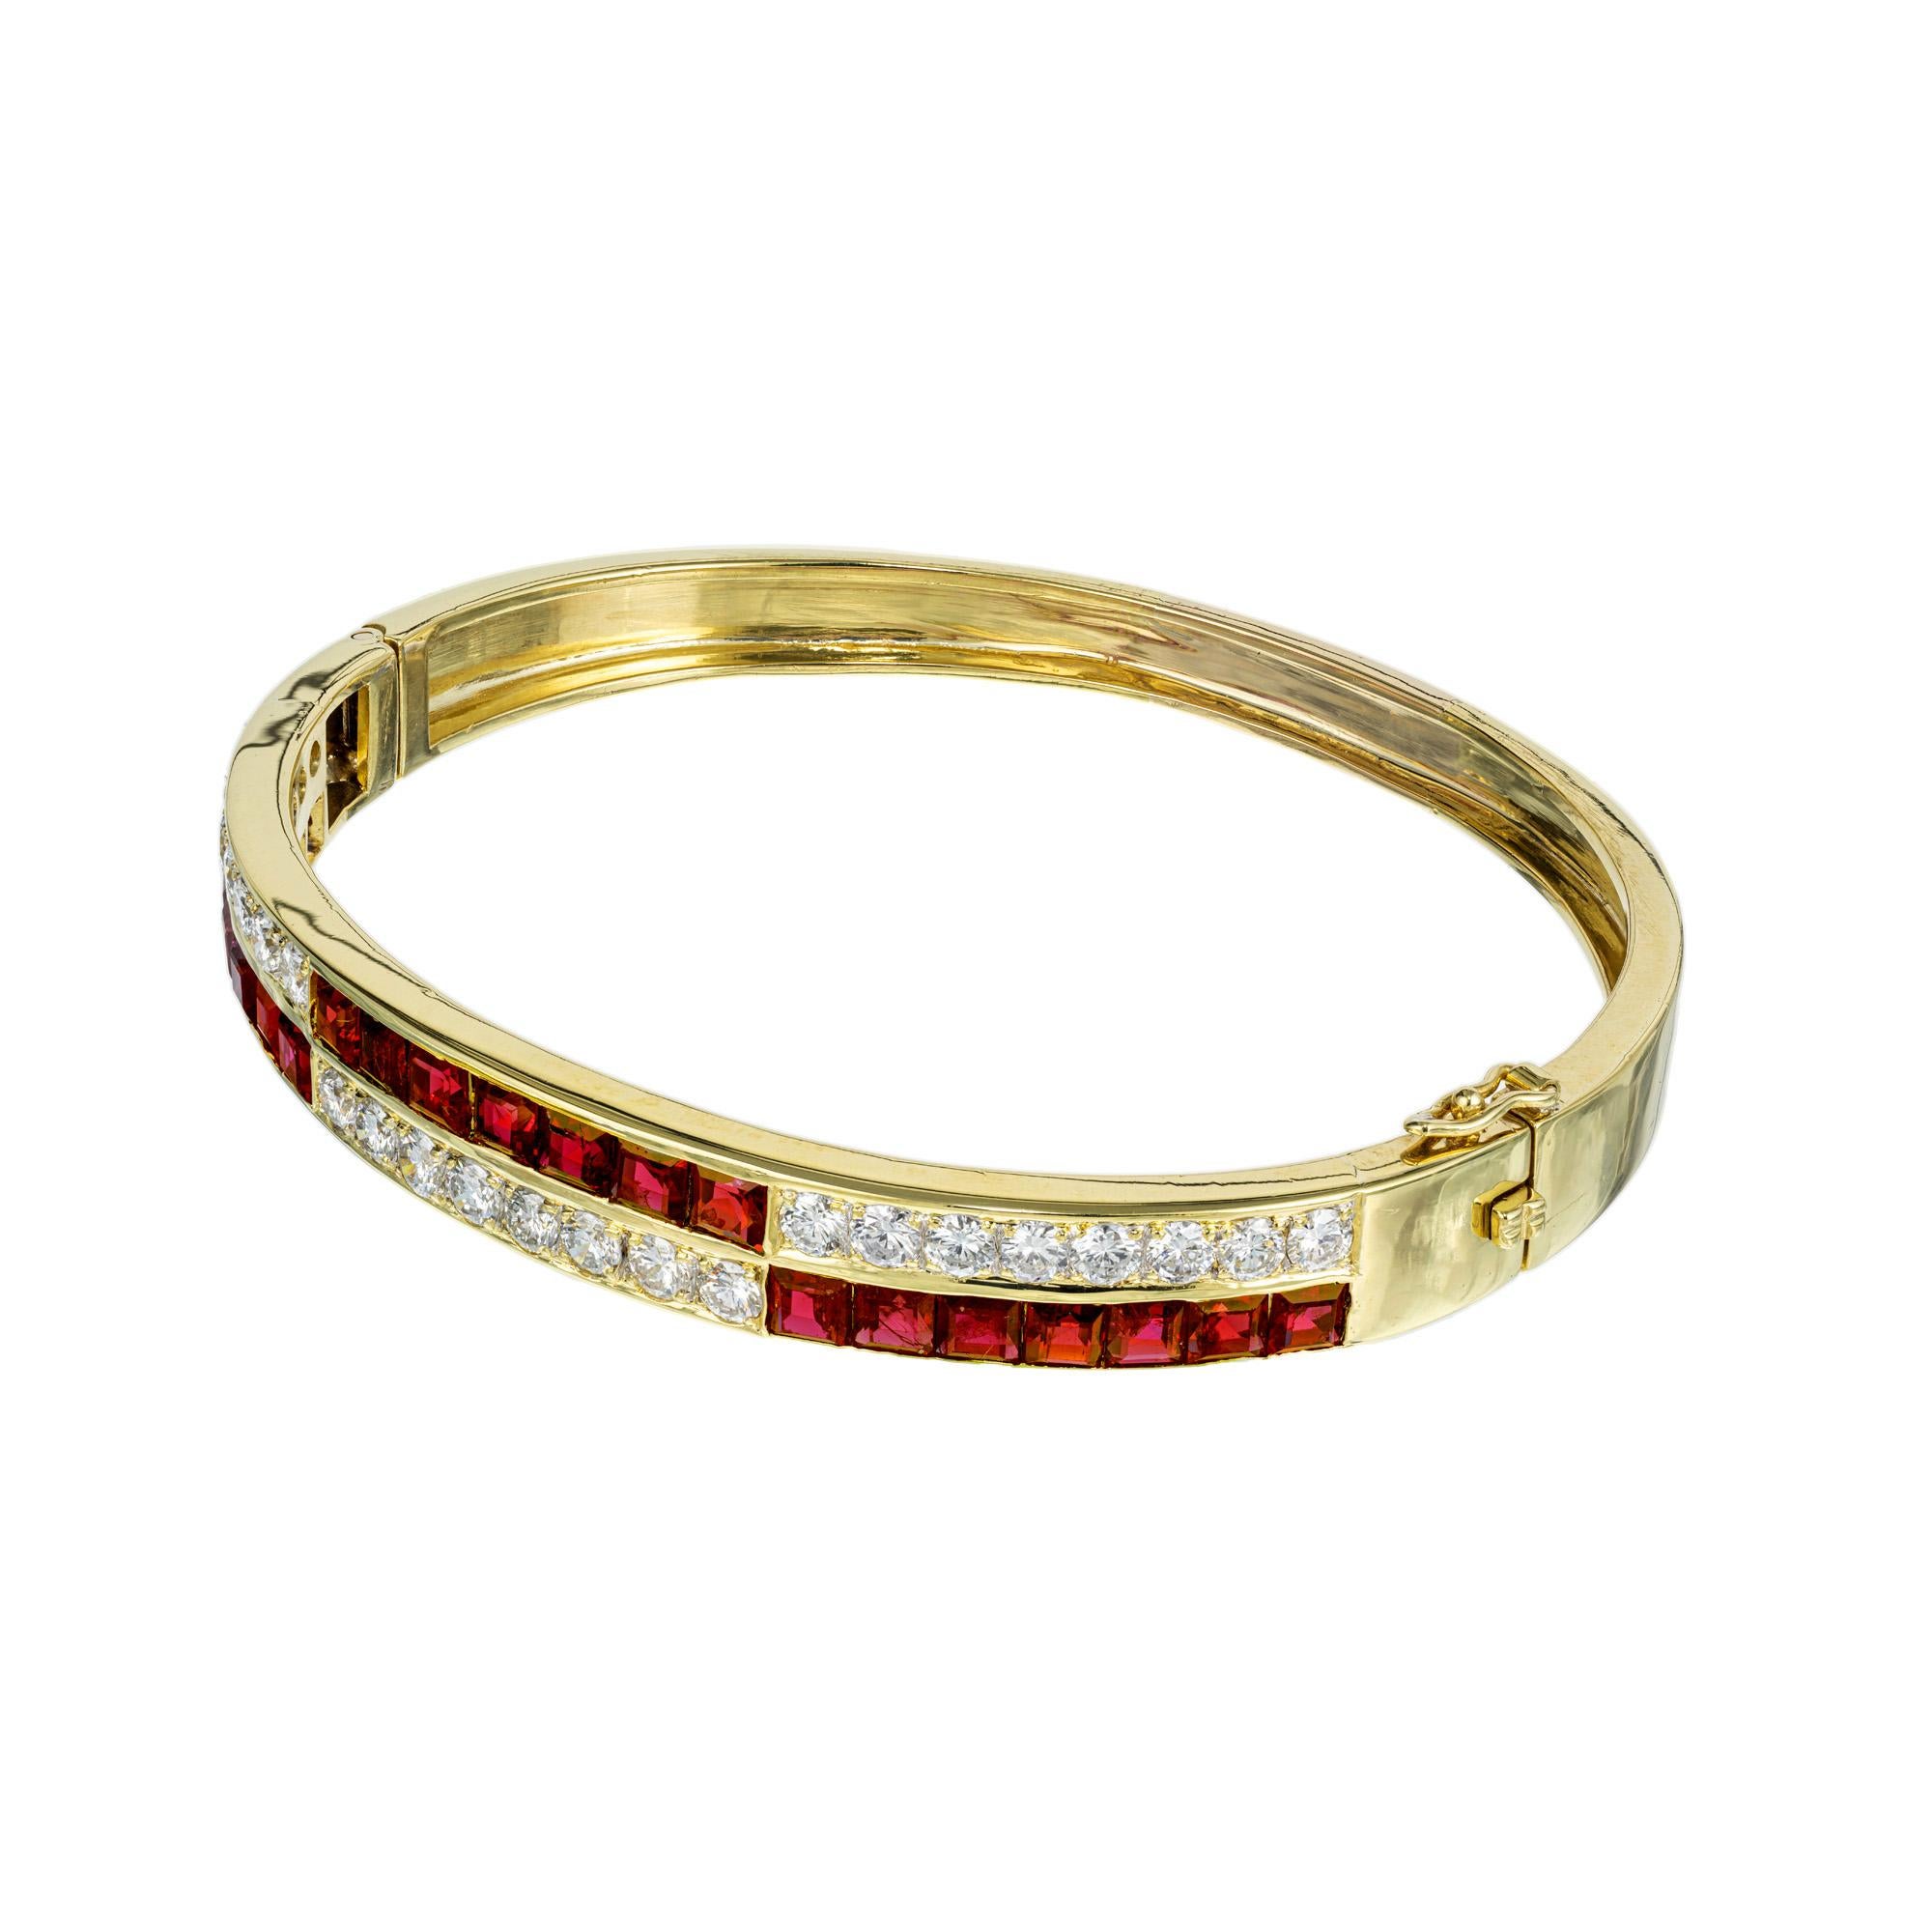 Ruby and diamond bangle bracelet. Alternating rows of 21 square shape rubies and 24 round cut diamonds set in a 18k yellow gold hinged bangle bracelet. The rubies are a rich medium red with bright white full cut diamonds. The oval shaped bracelet